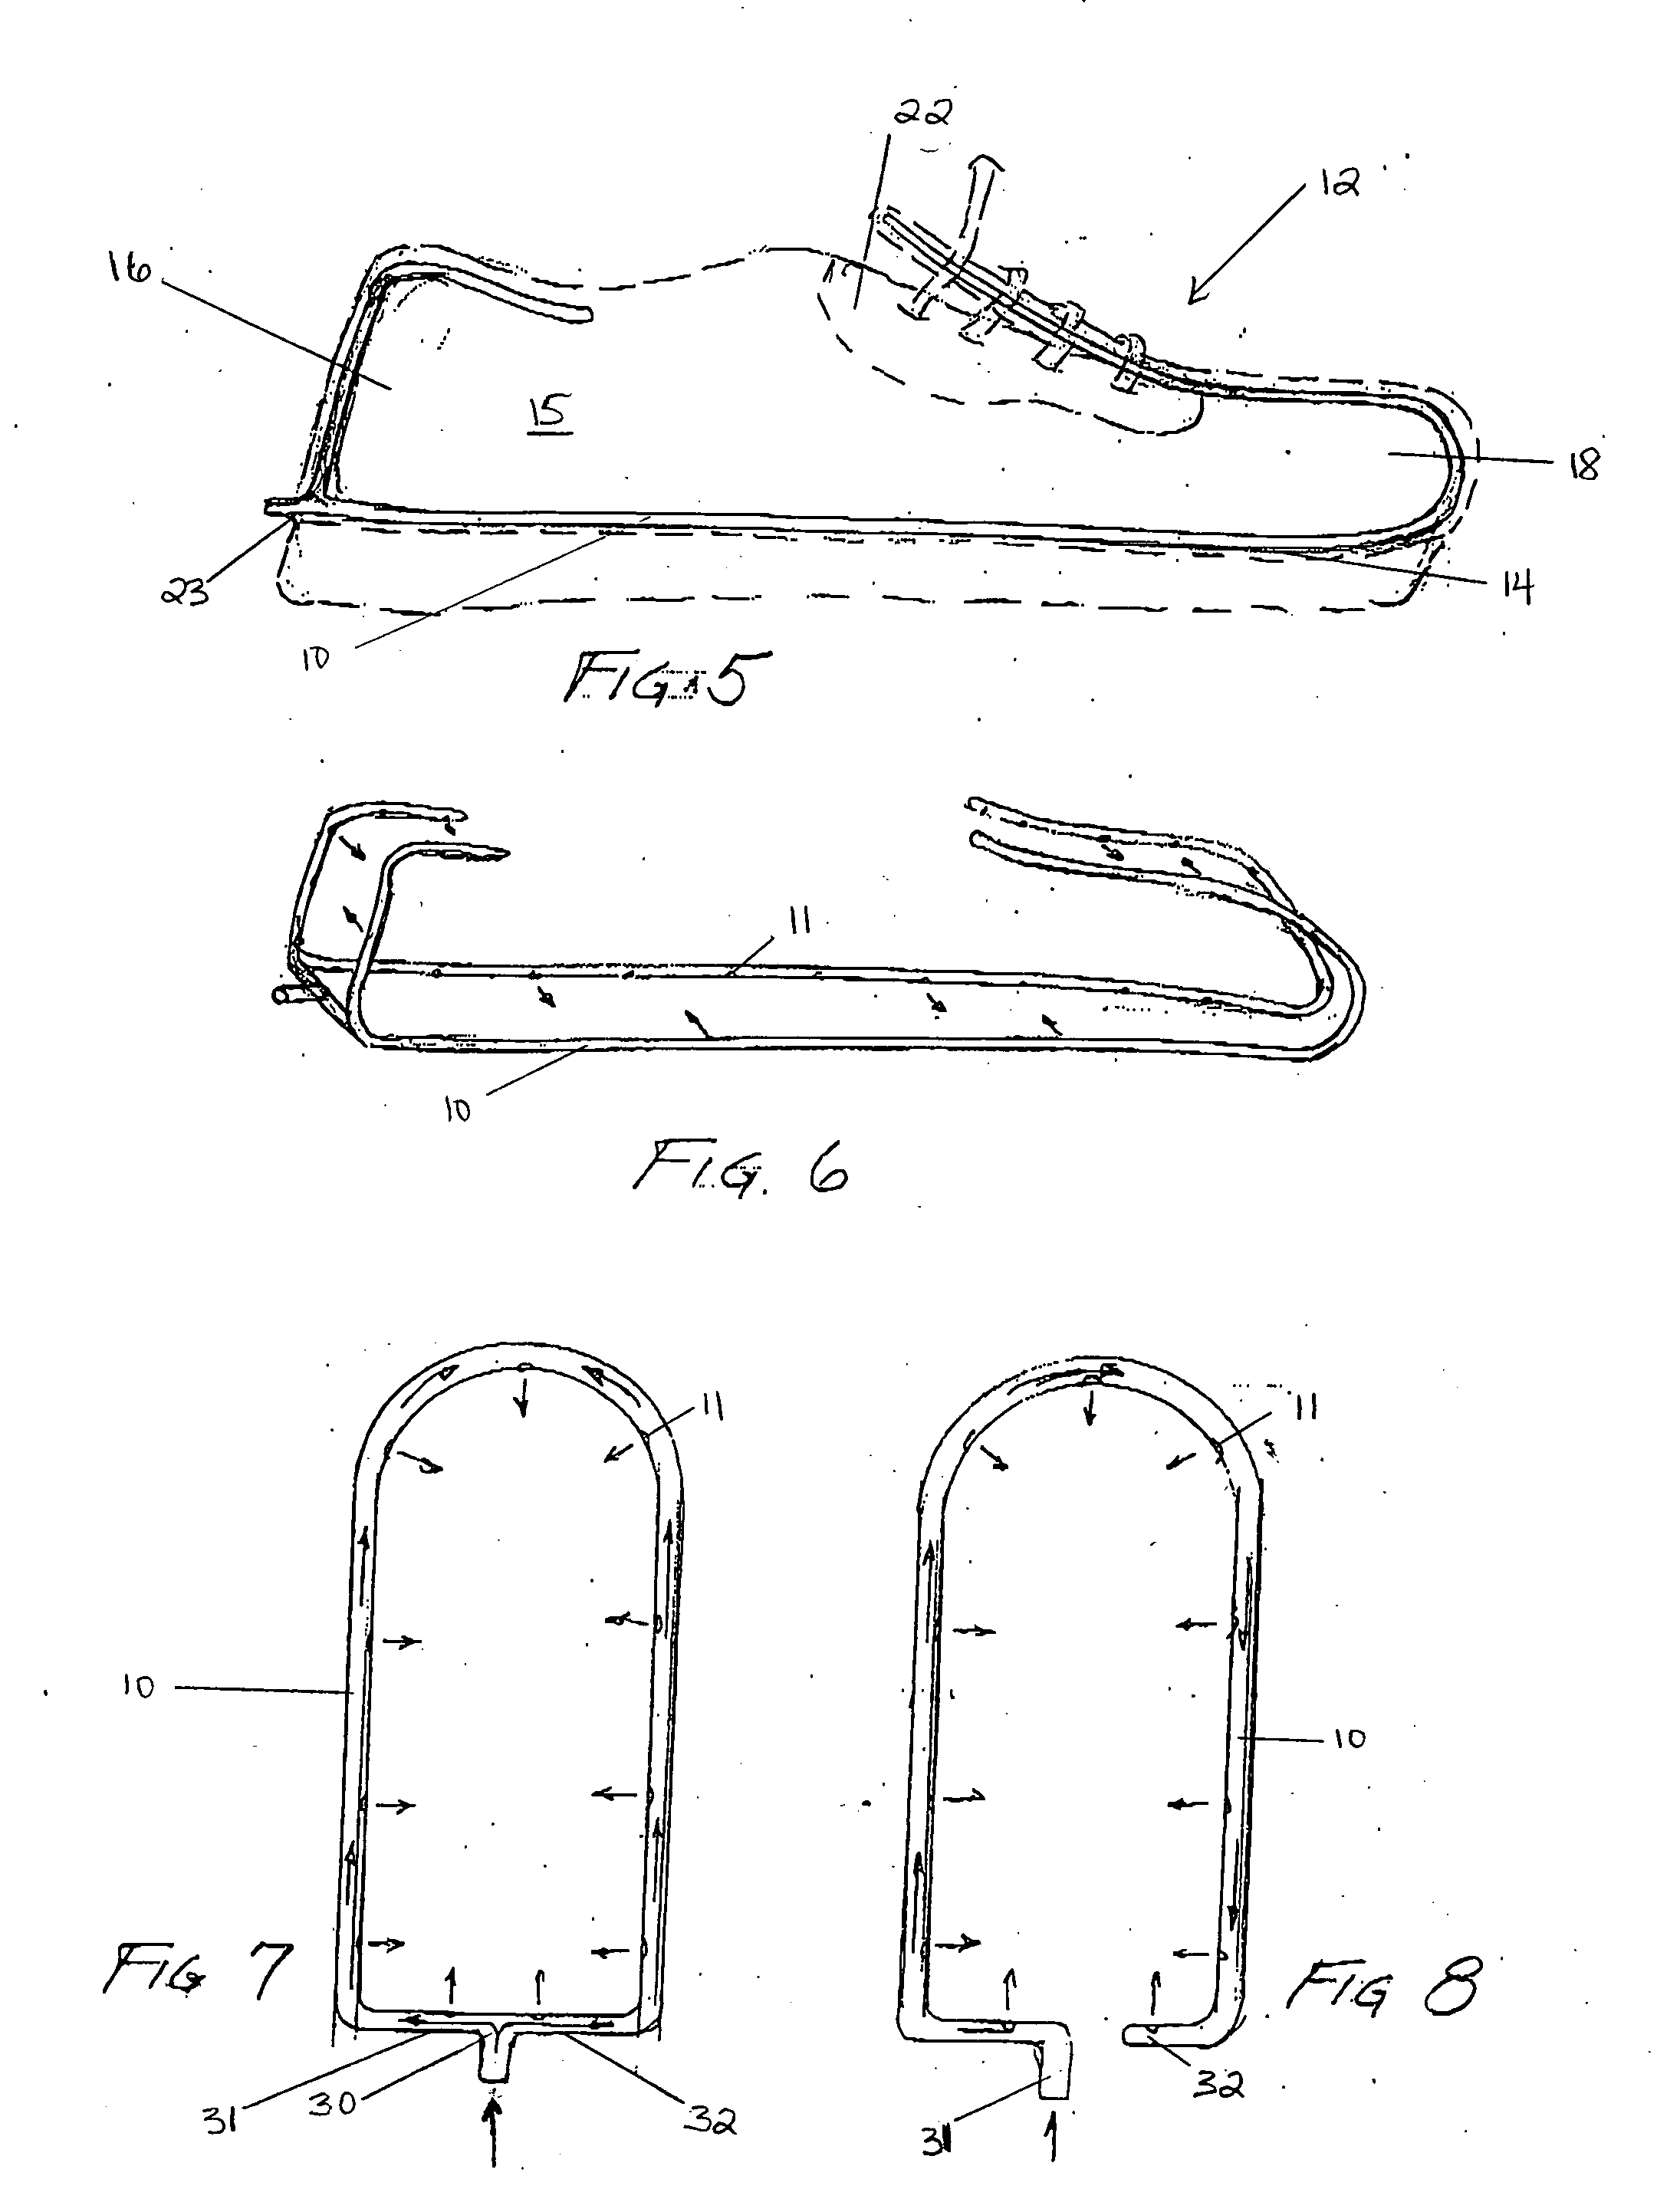 Foot pain-relieving articles and method thereof